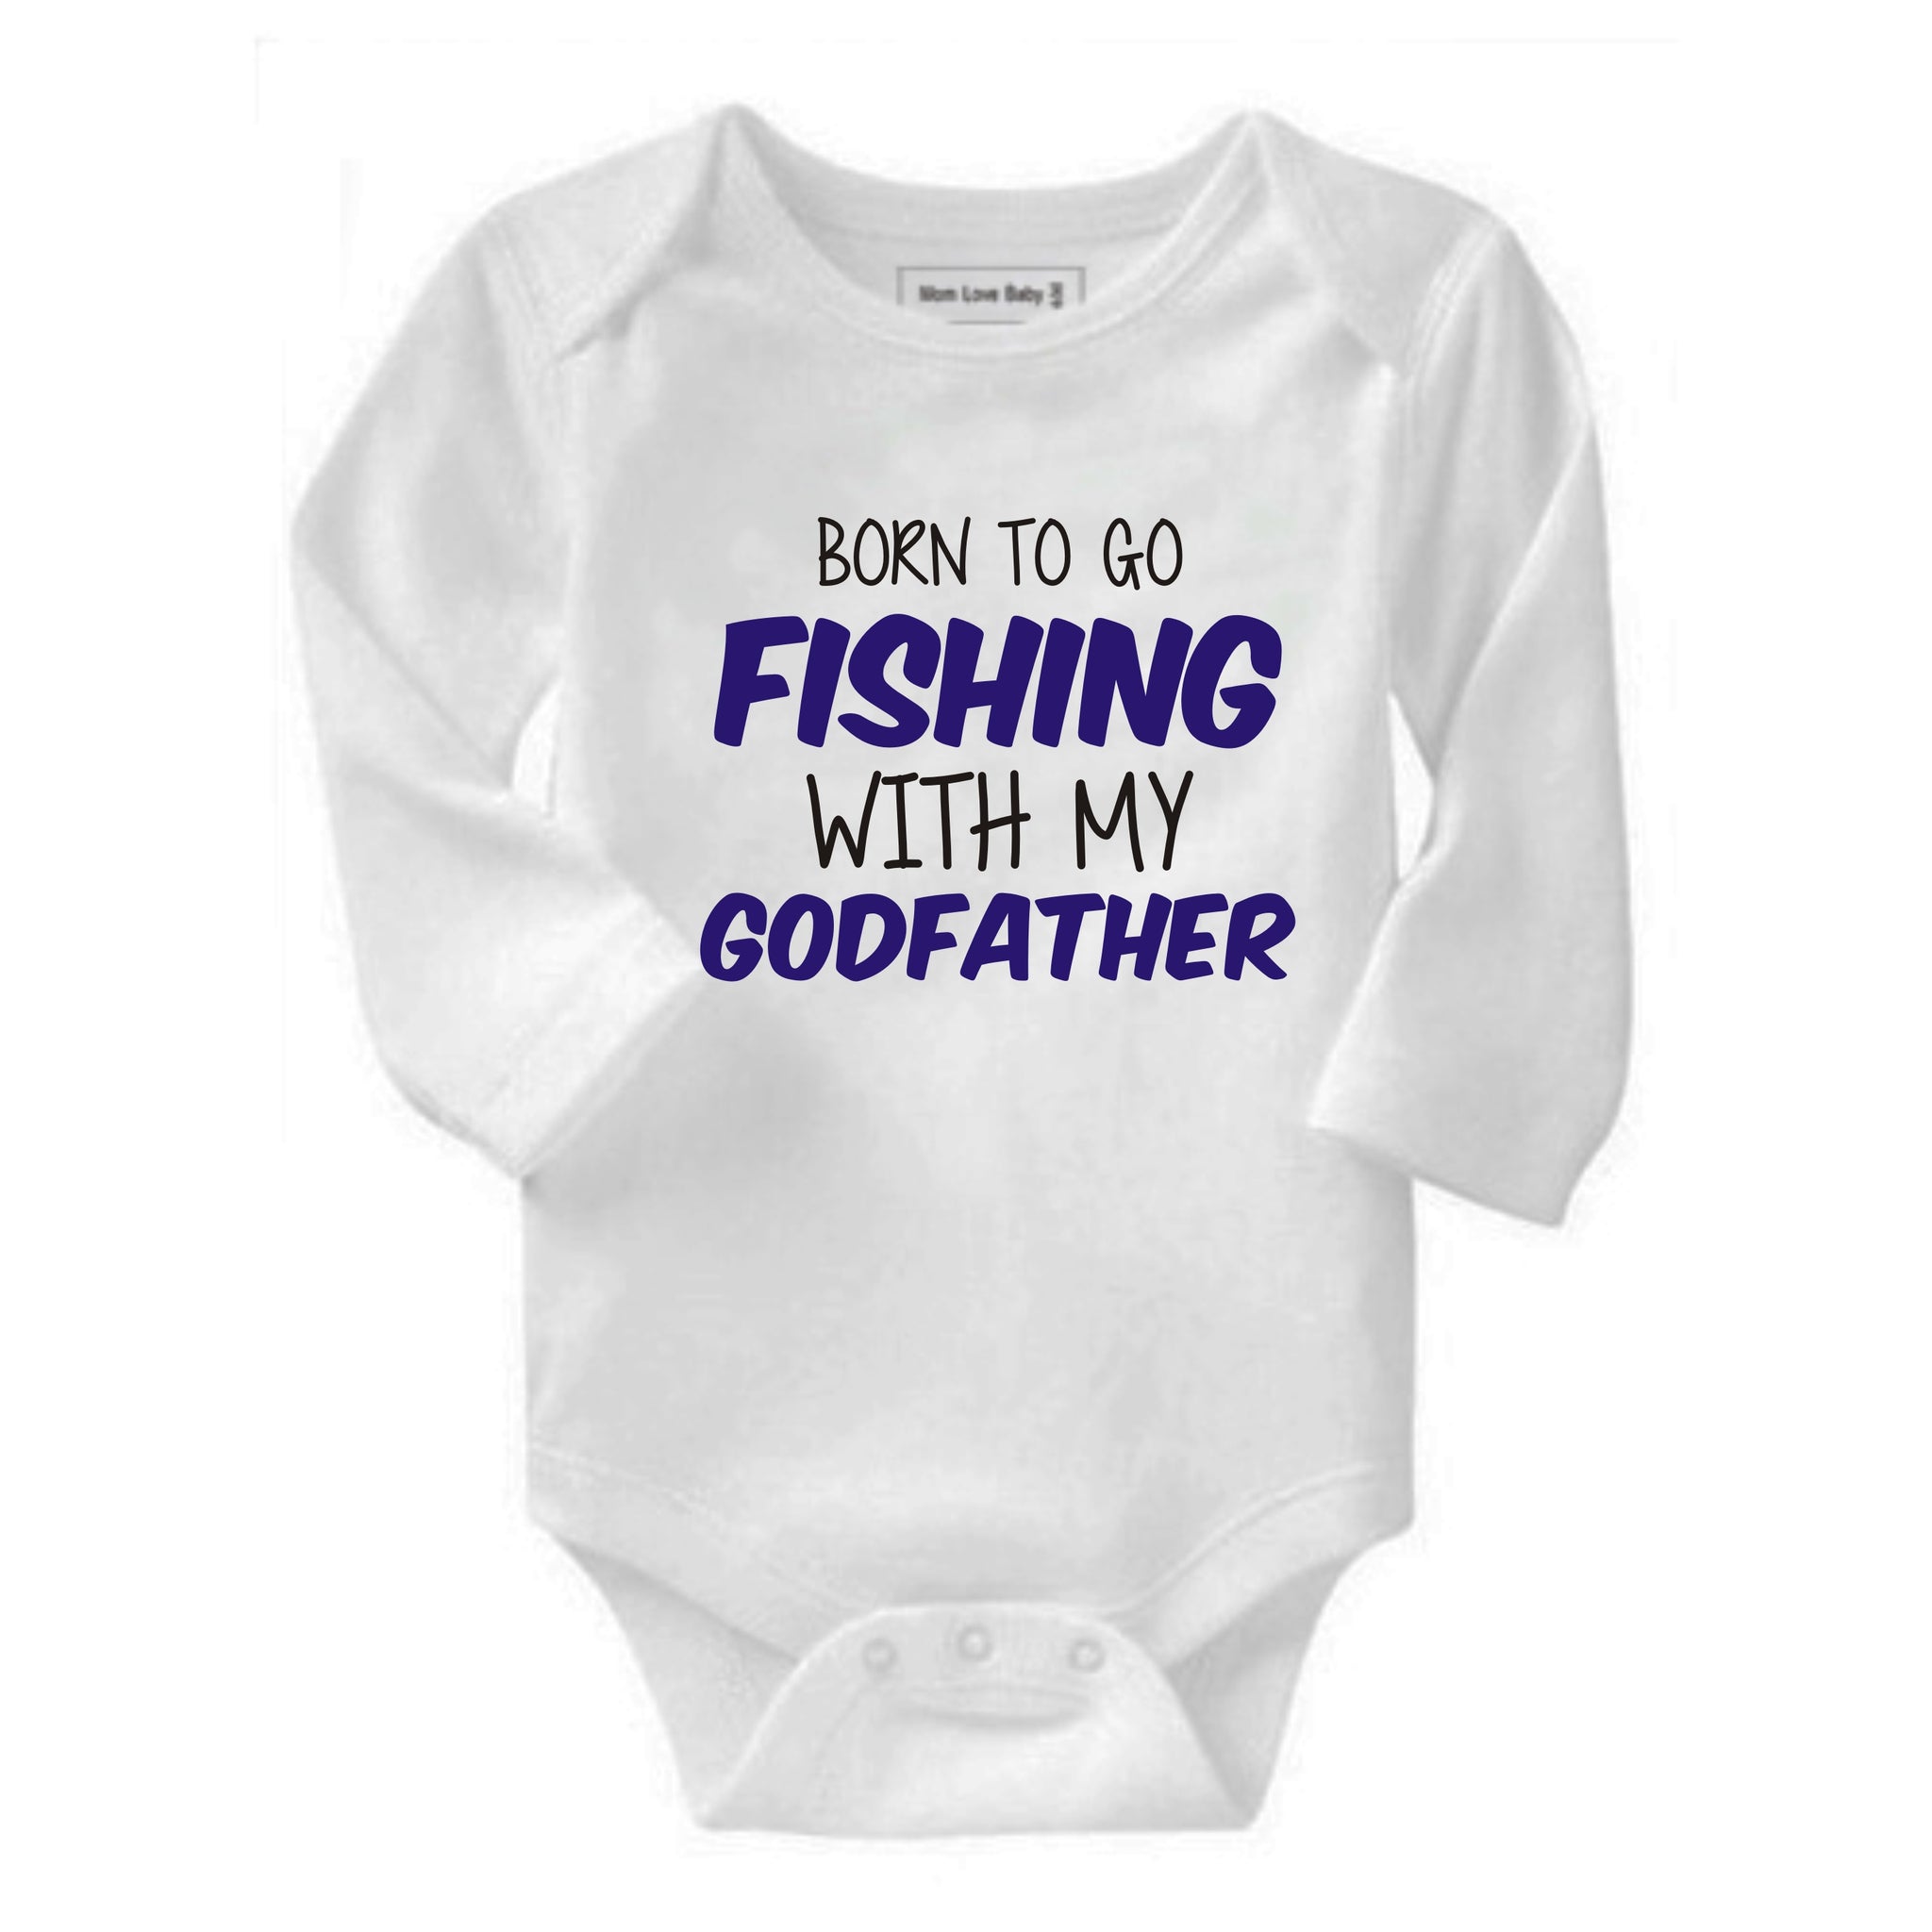 Born to go Fishing with my Daddy/ Grandad/ Godfather/ Uncle baby